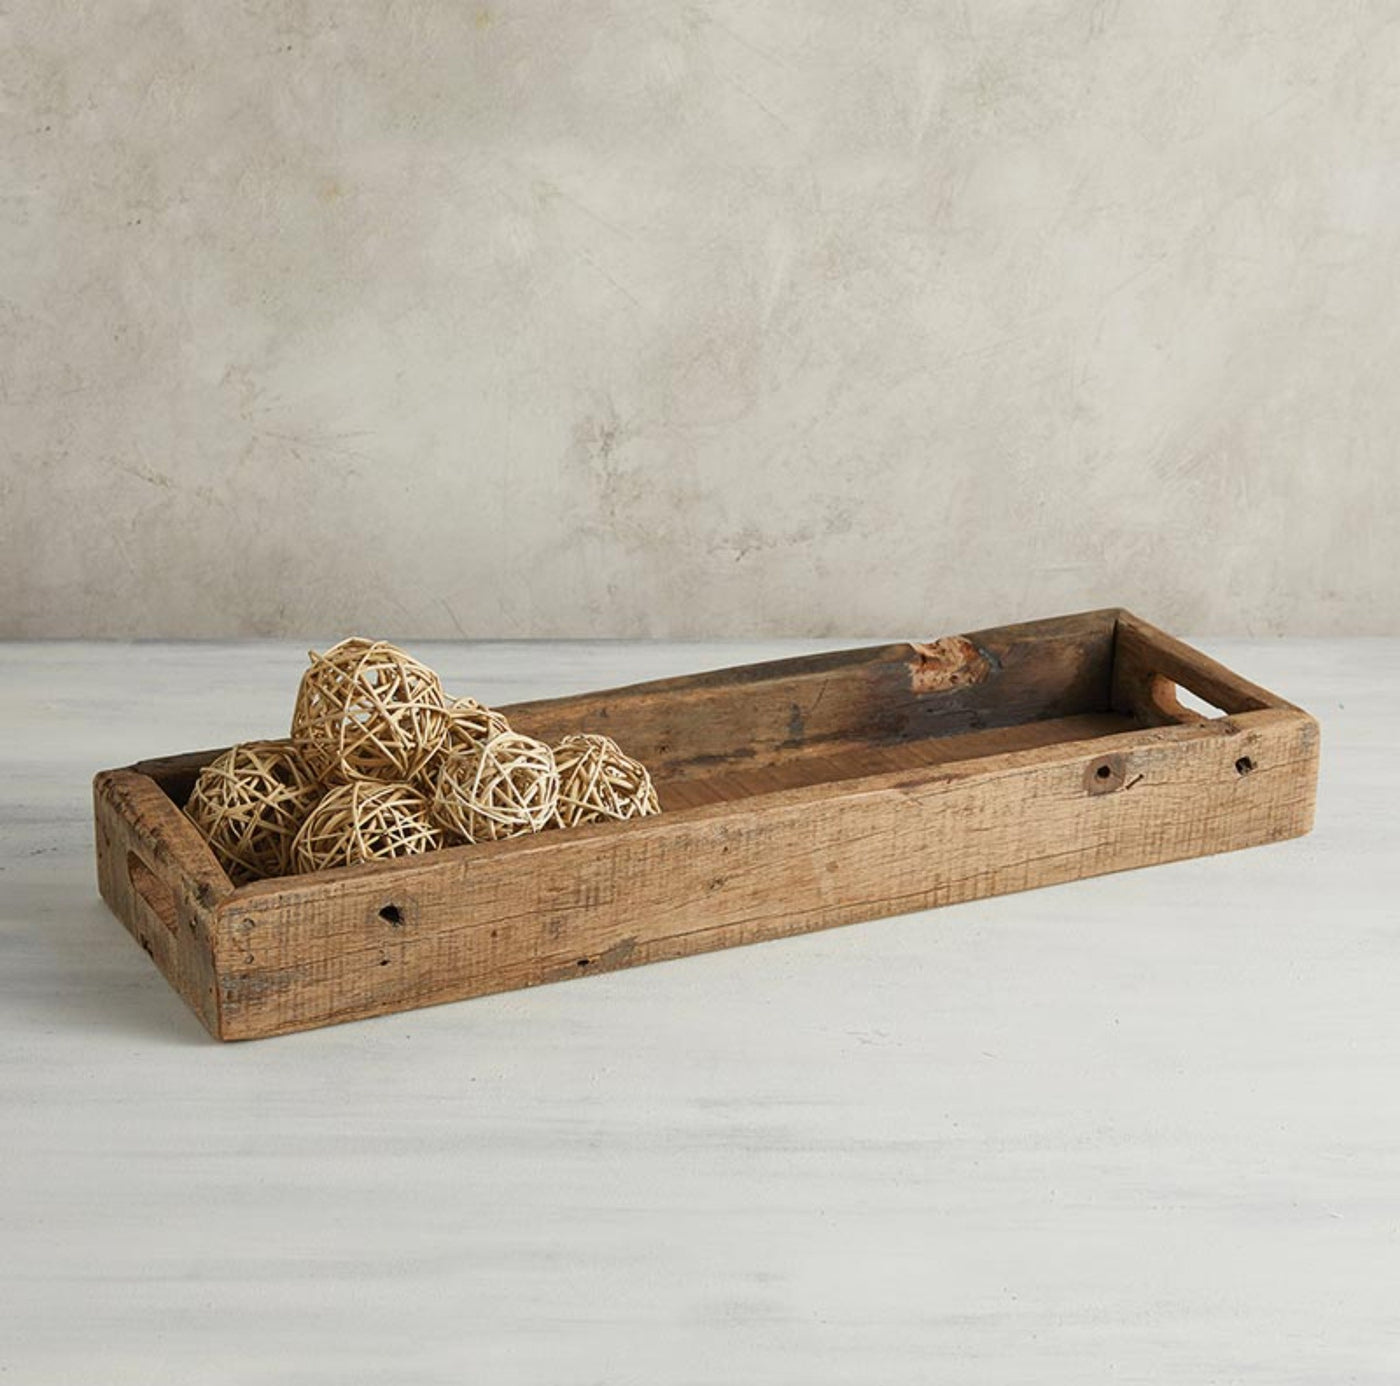 Wooden Tray: Rustic wood, in a rectangle shape with handles. Decorative balls not included.